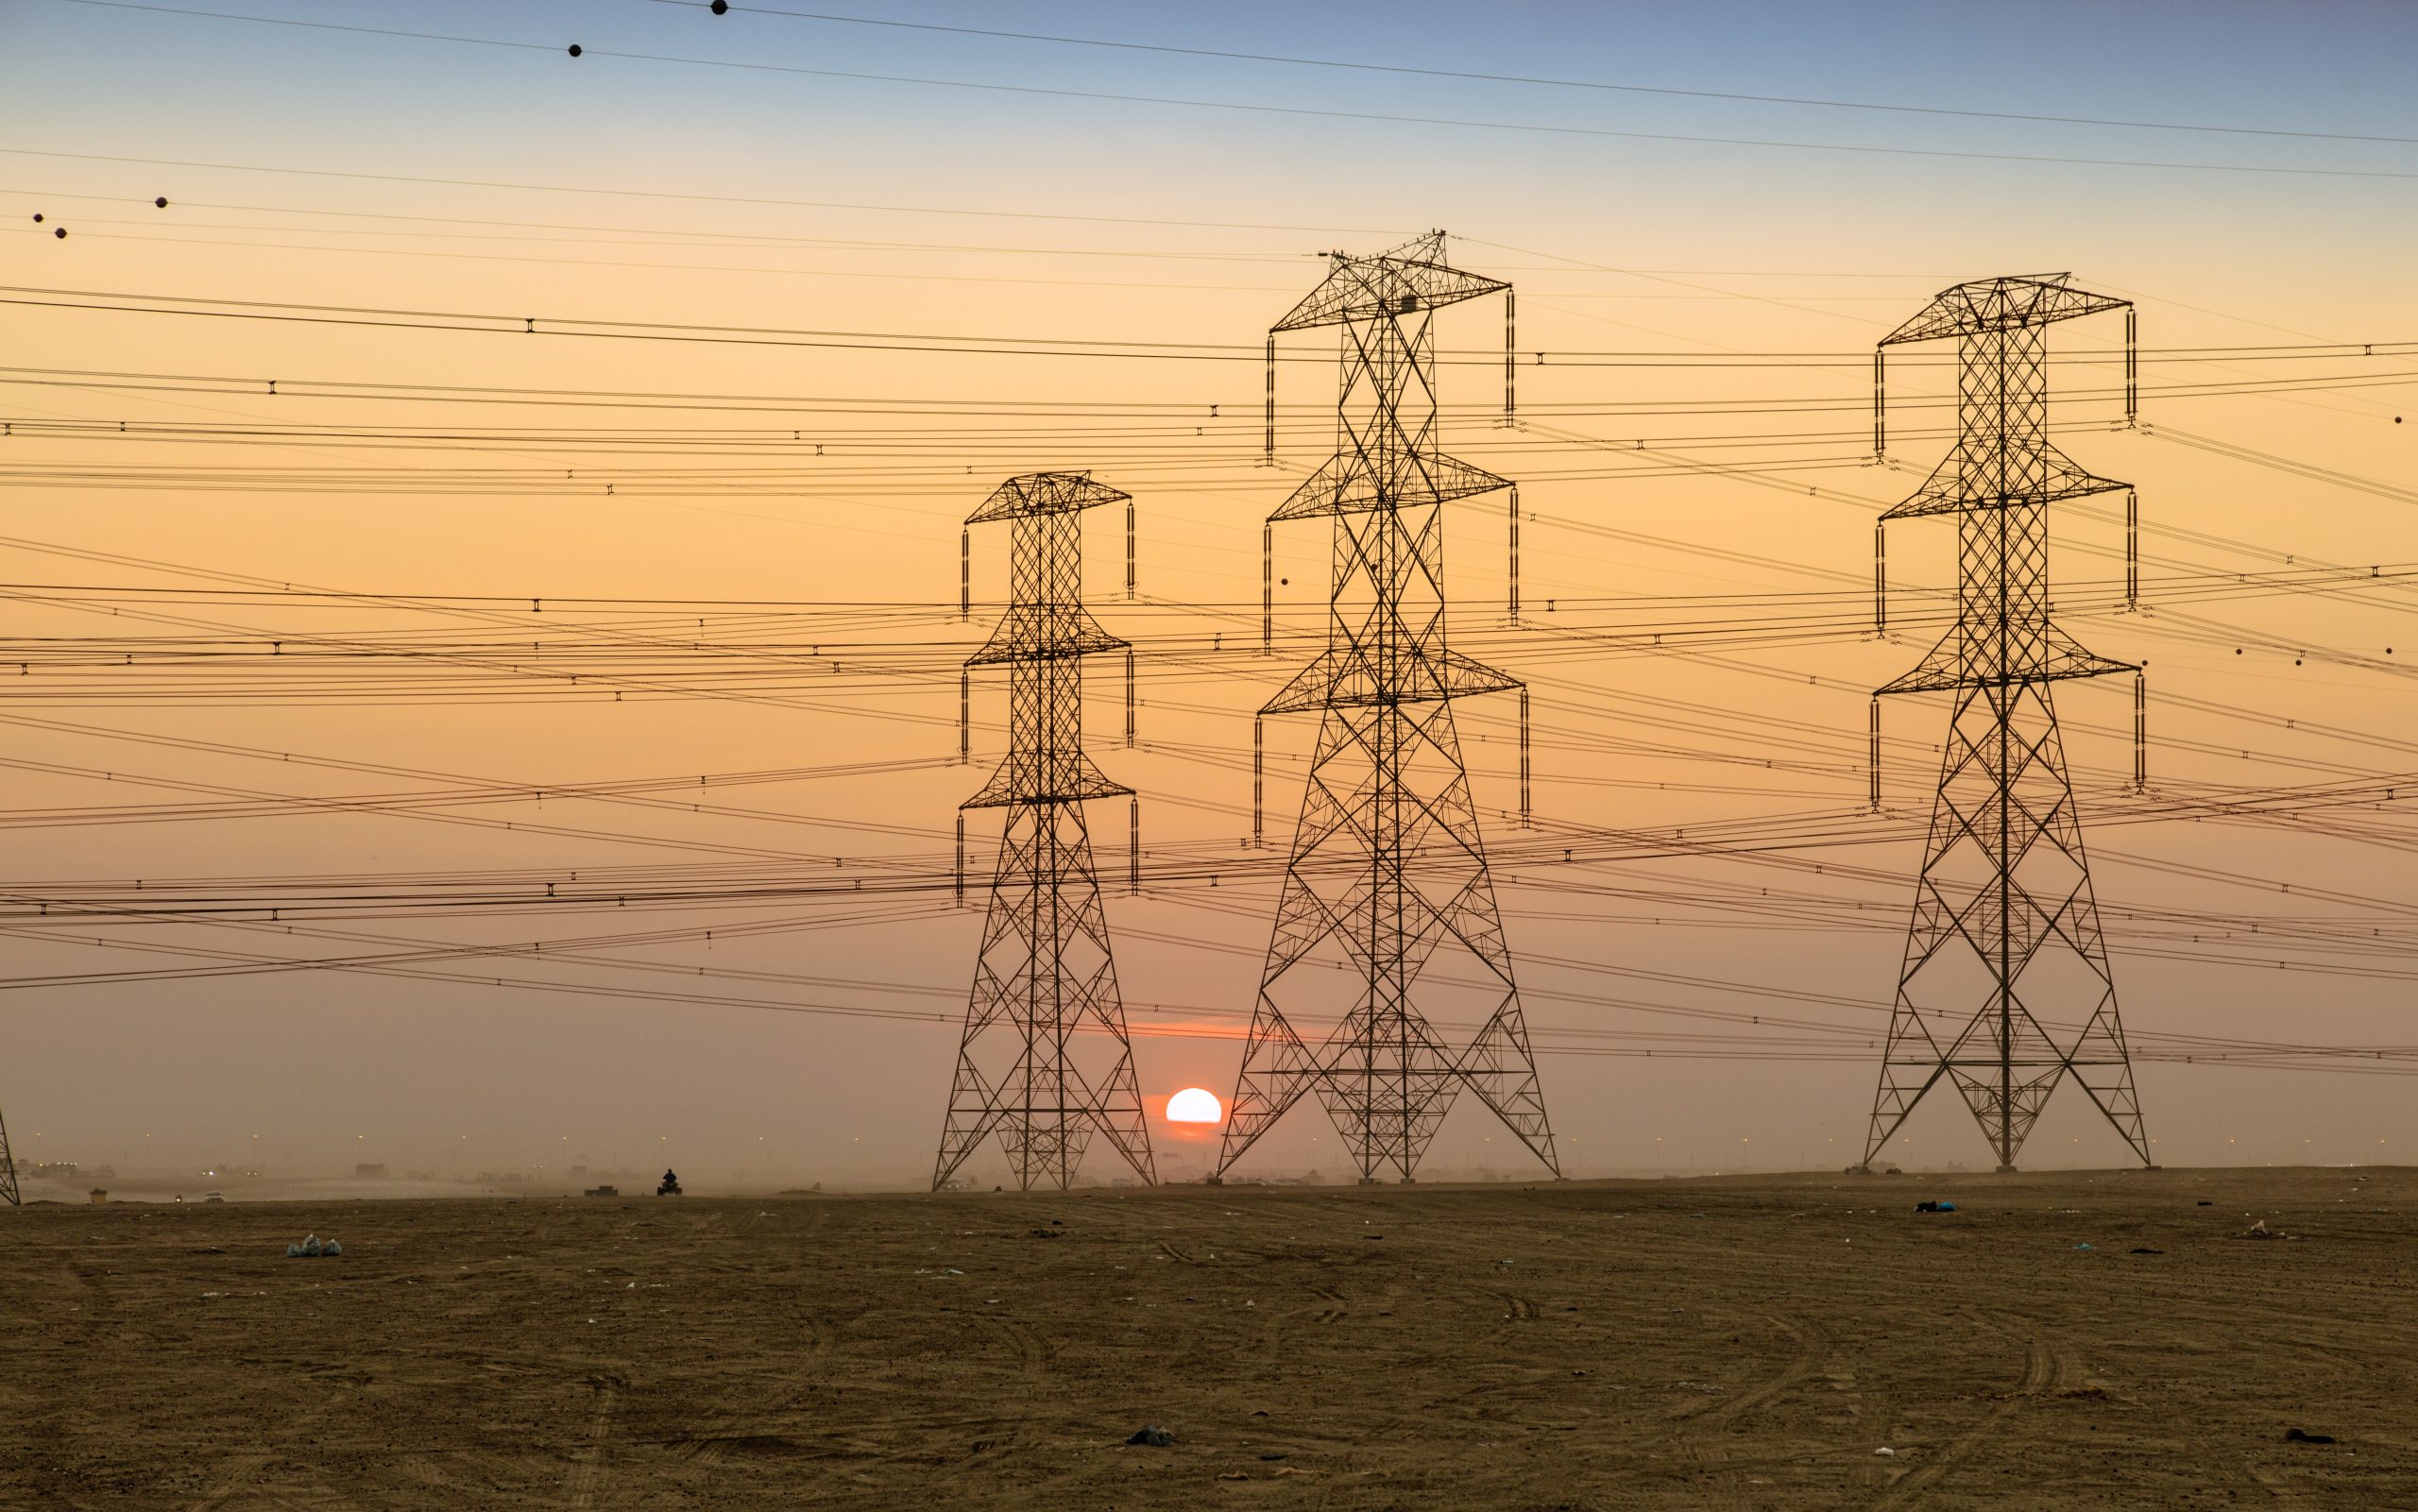 Electric Towers During Sunset